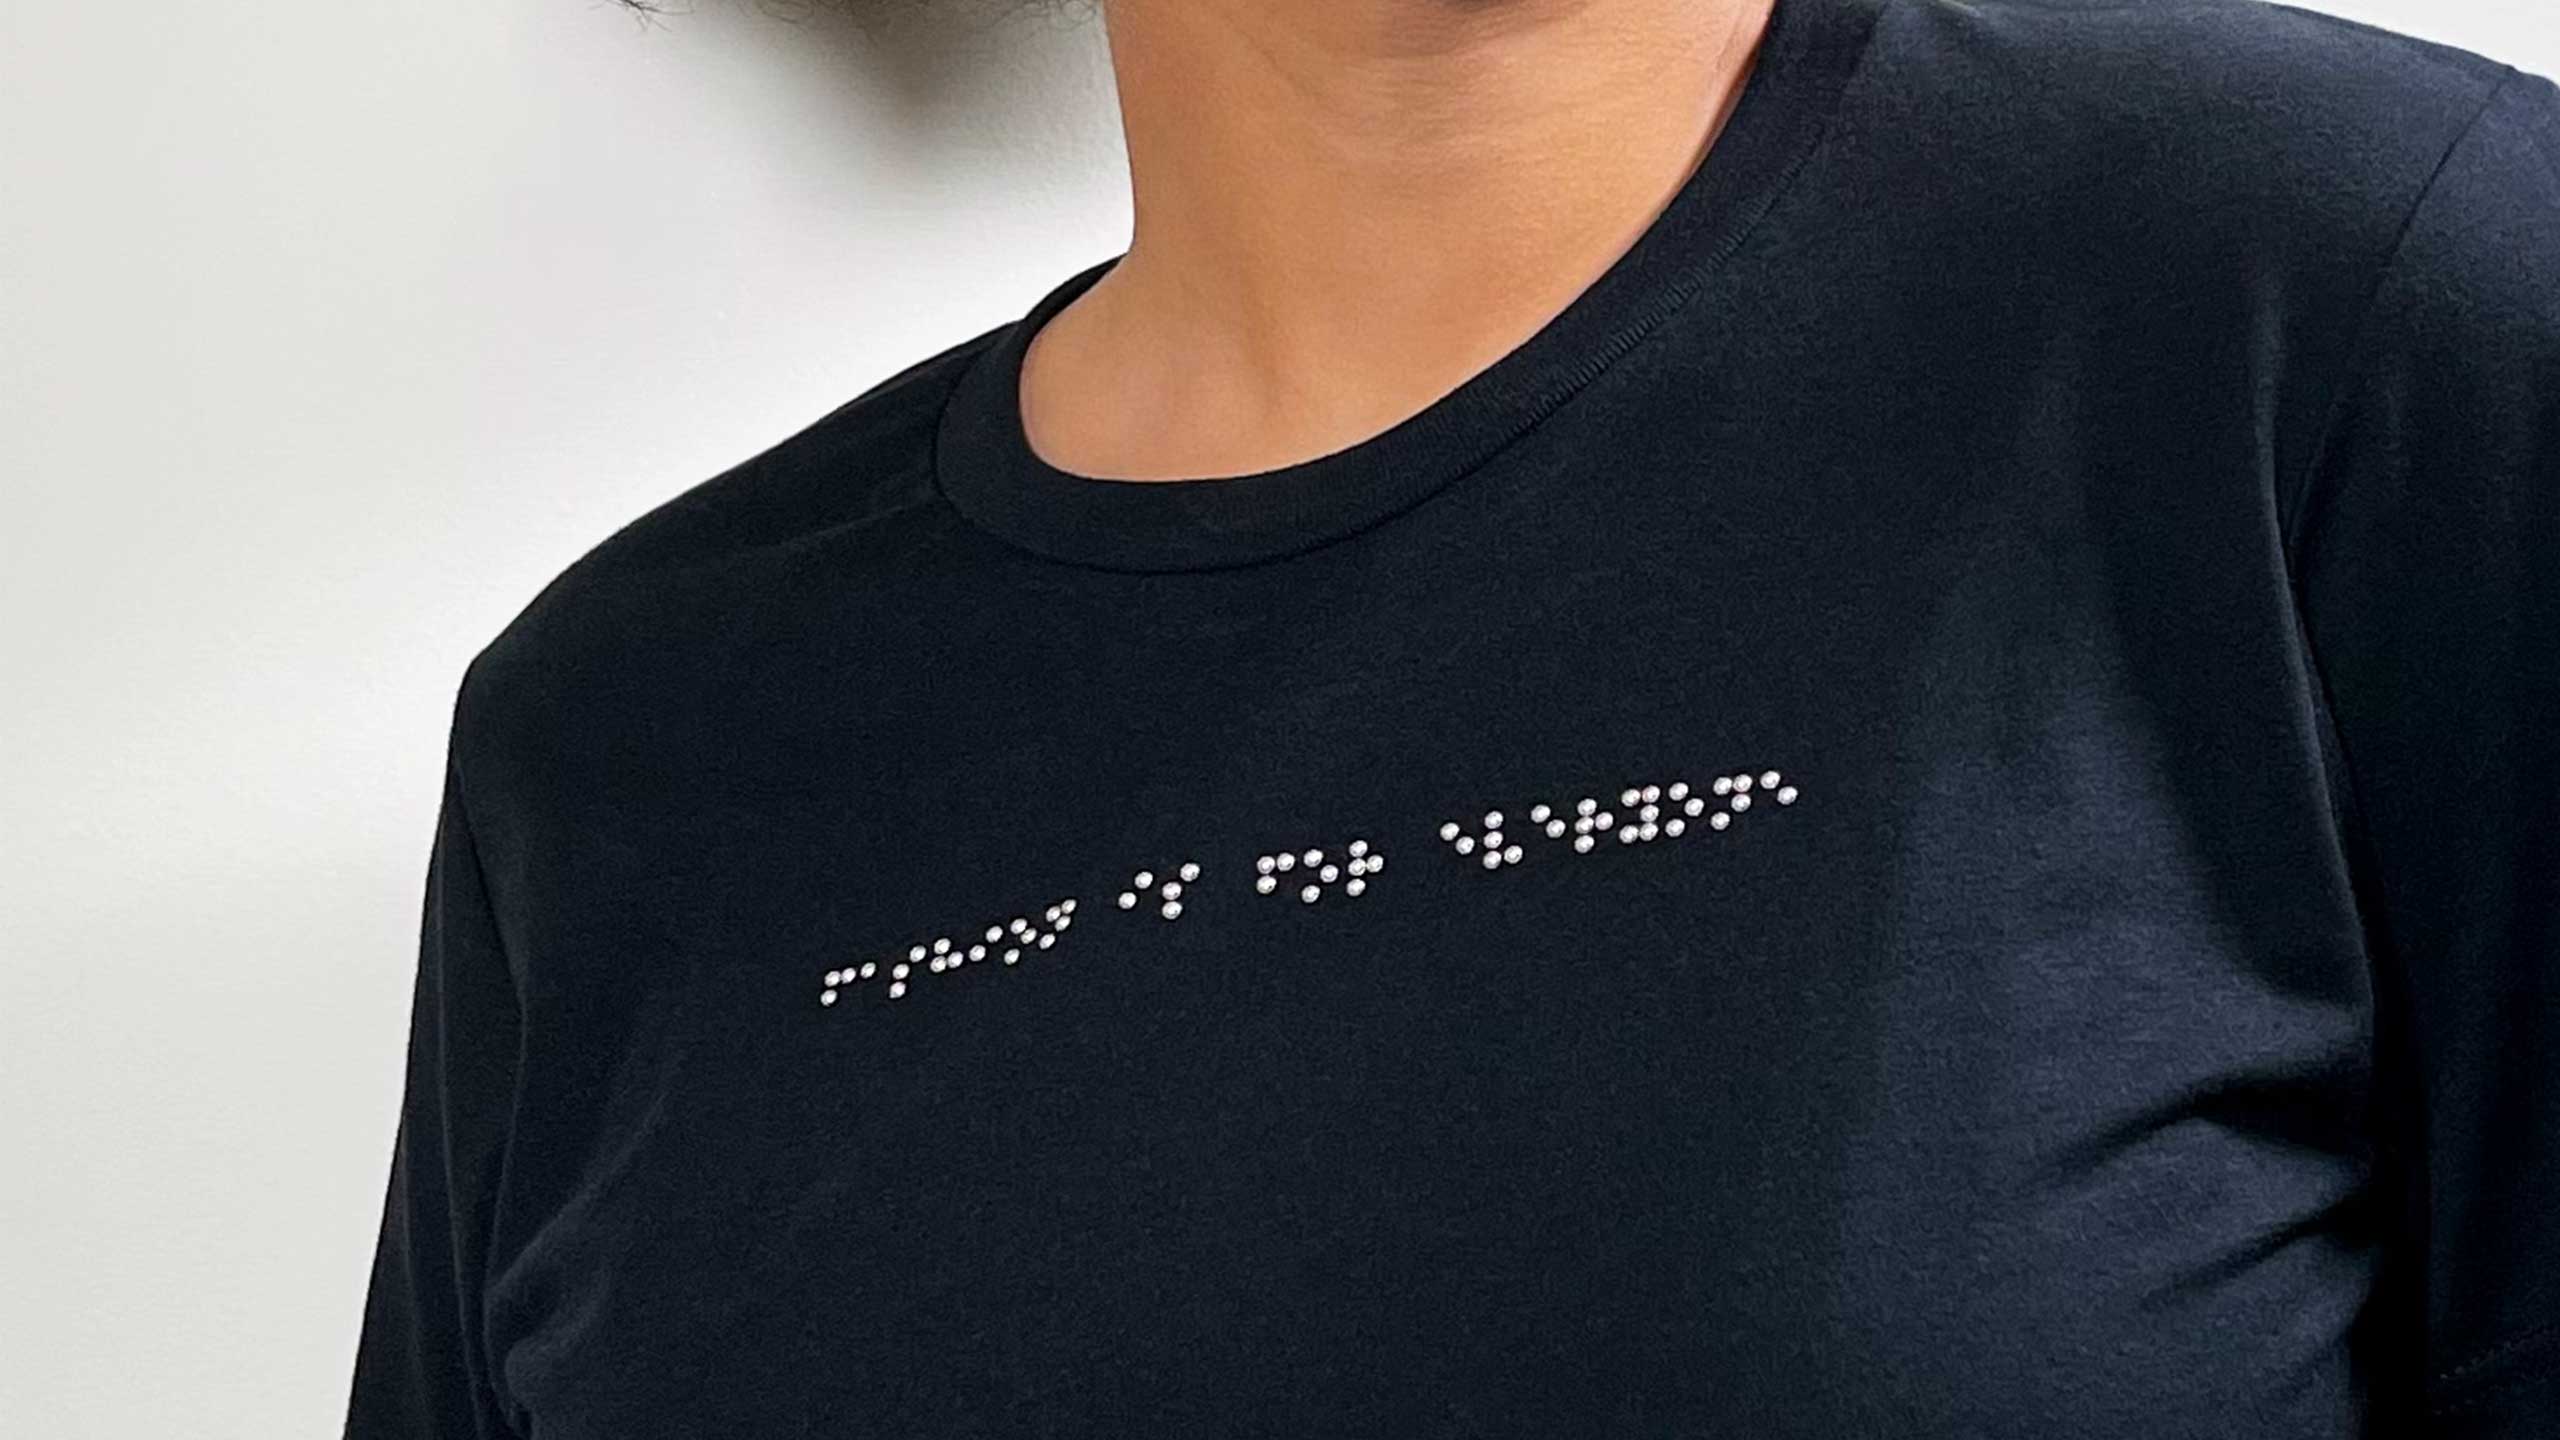 A dark shirt with braille writing on it.